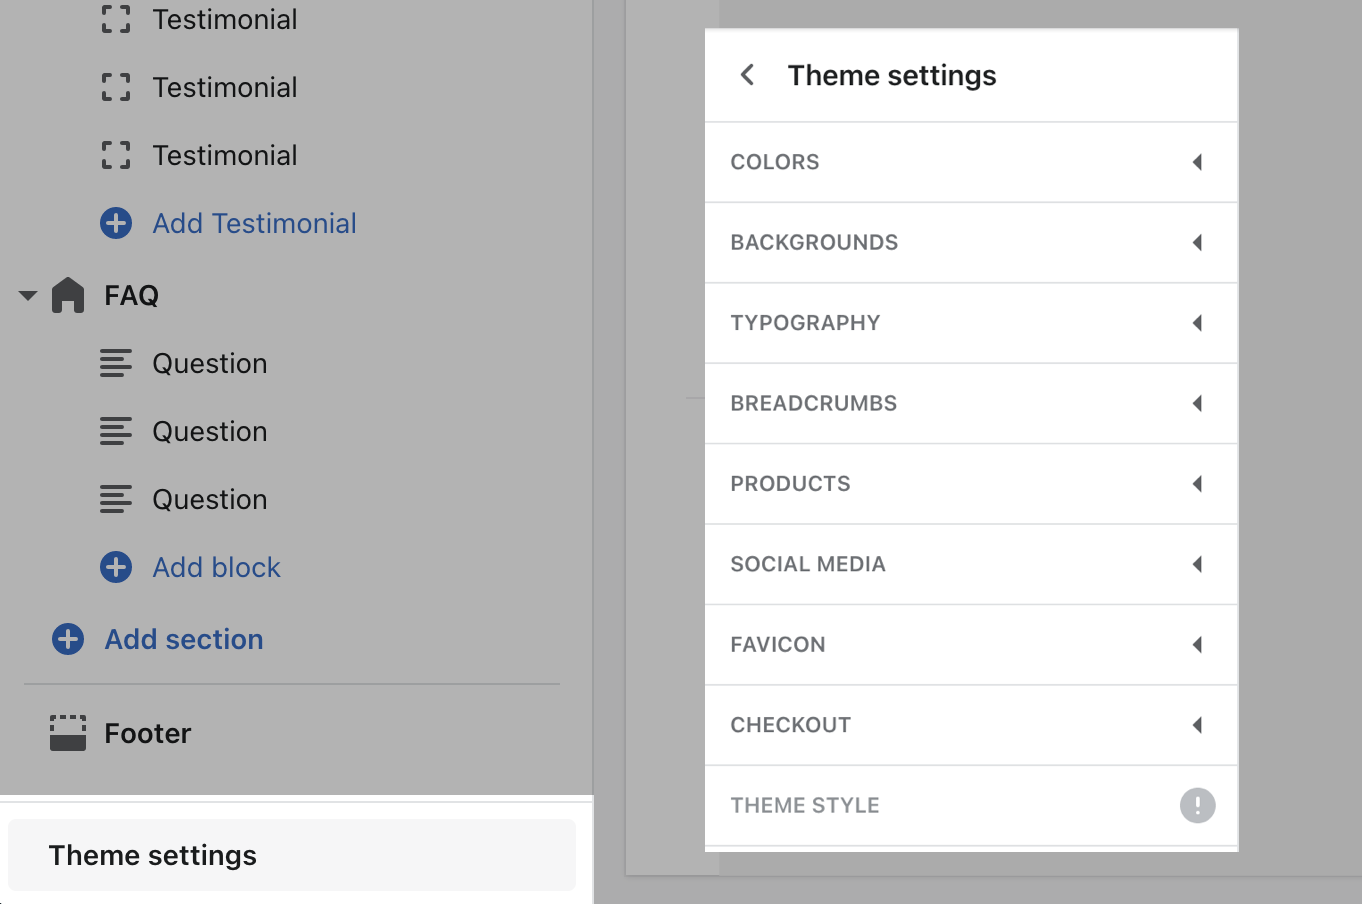 theme_settings_revealed_by_clicking_link_in_bottom_left.png